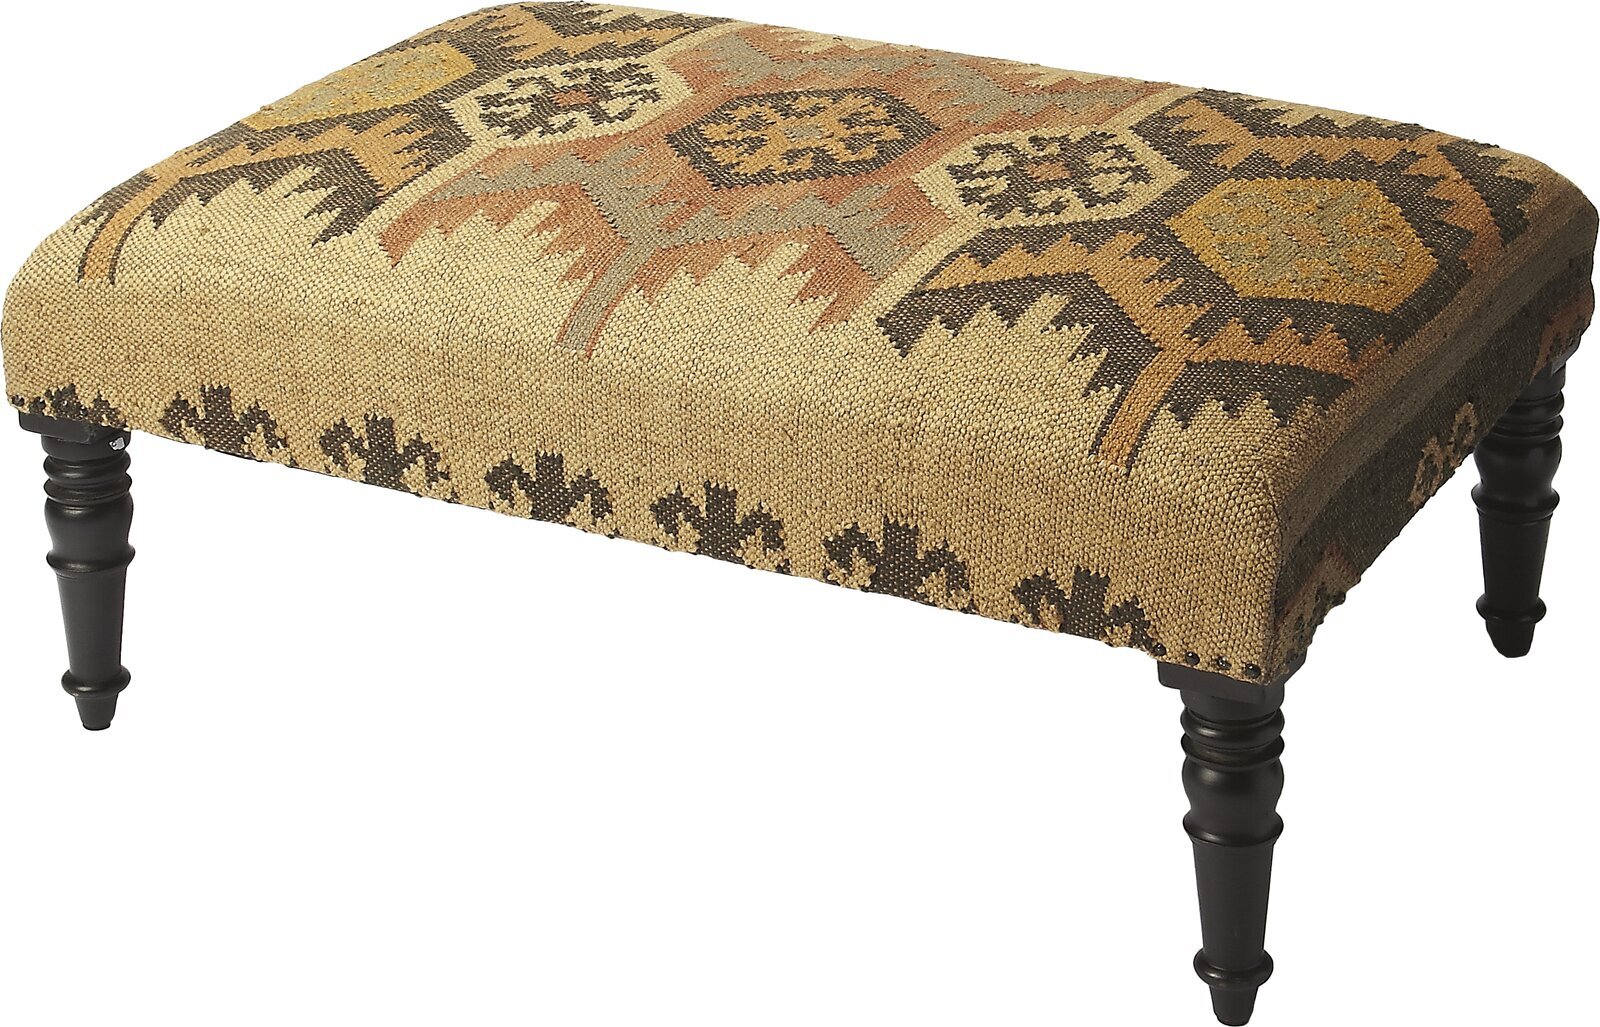 … or a southwestern style furniture ottoman